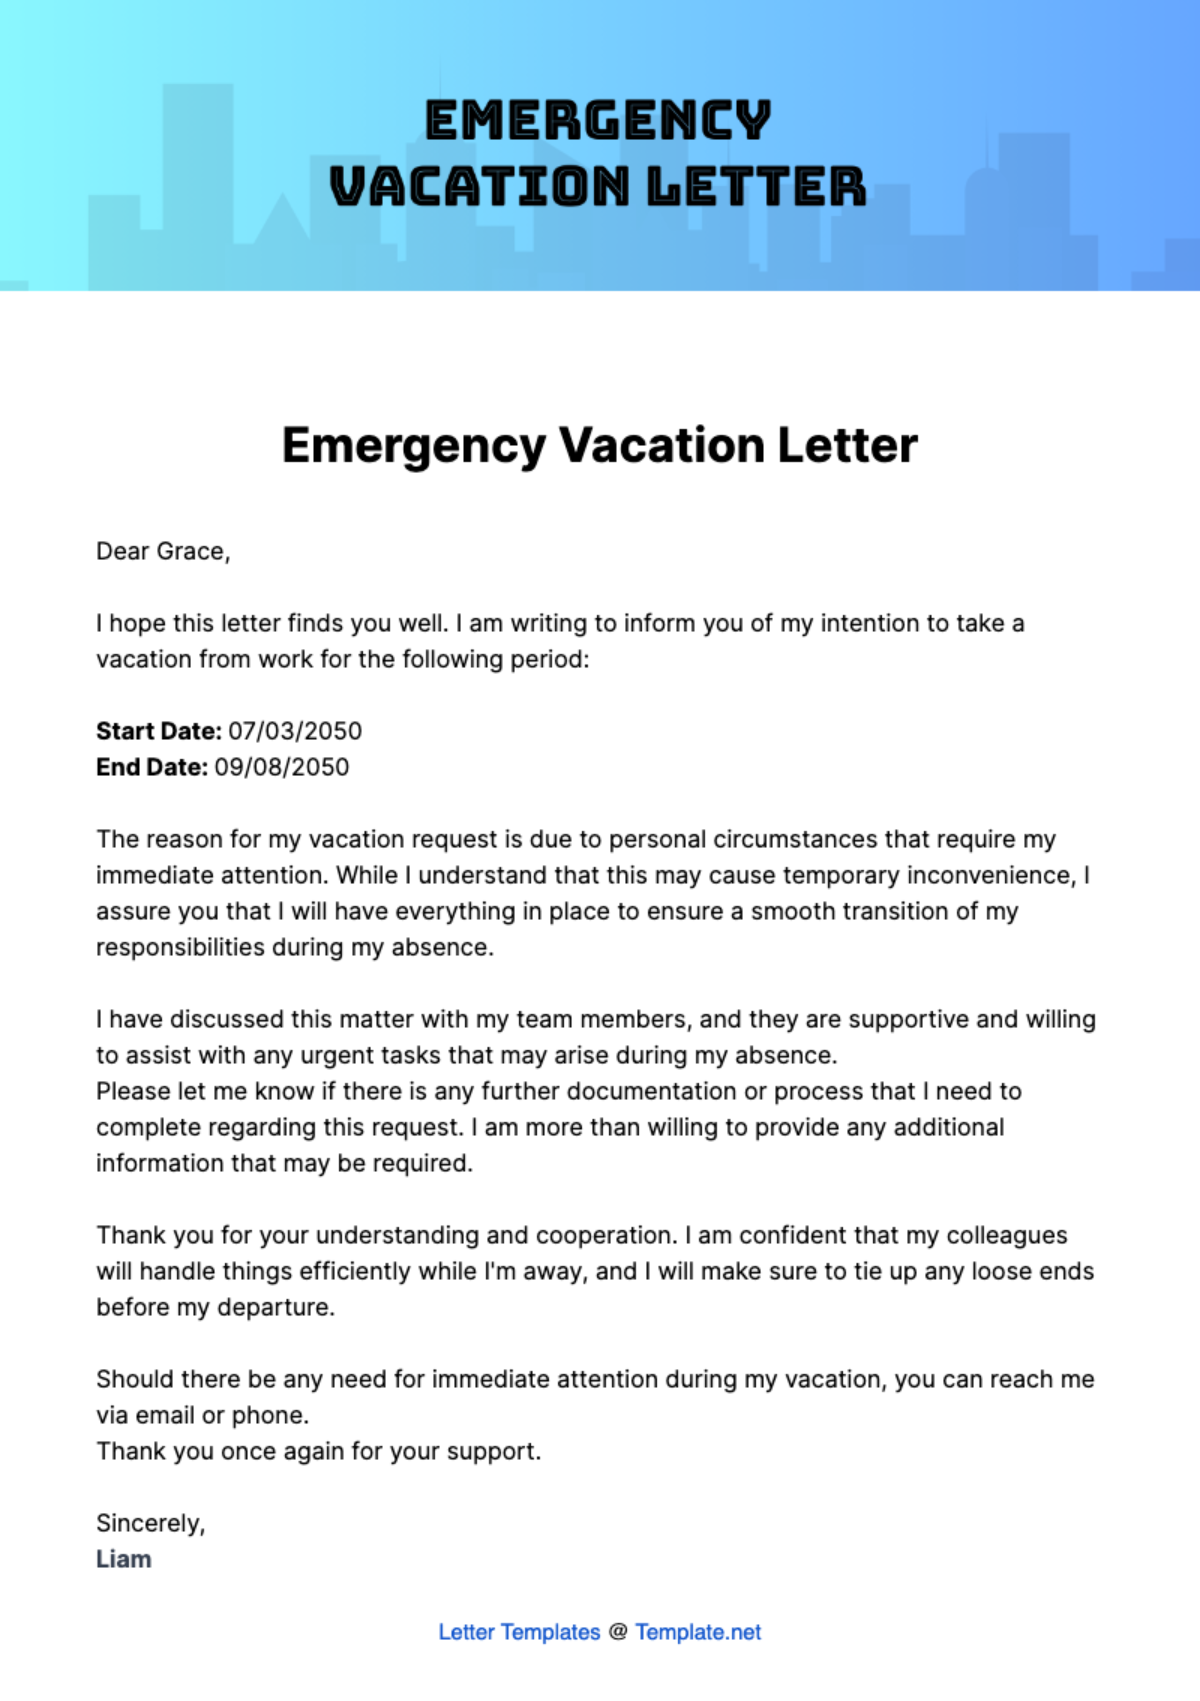 Free Emergency Vacation Letter Template